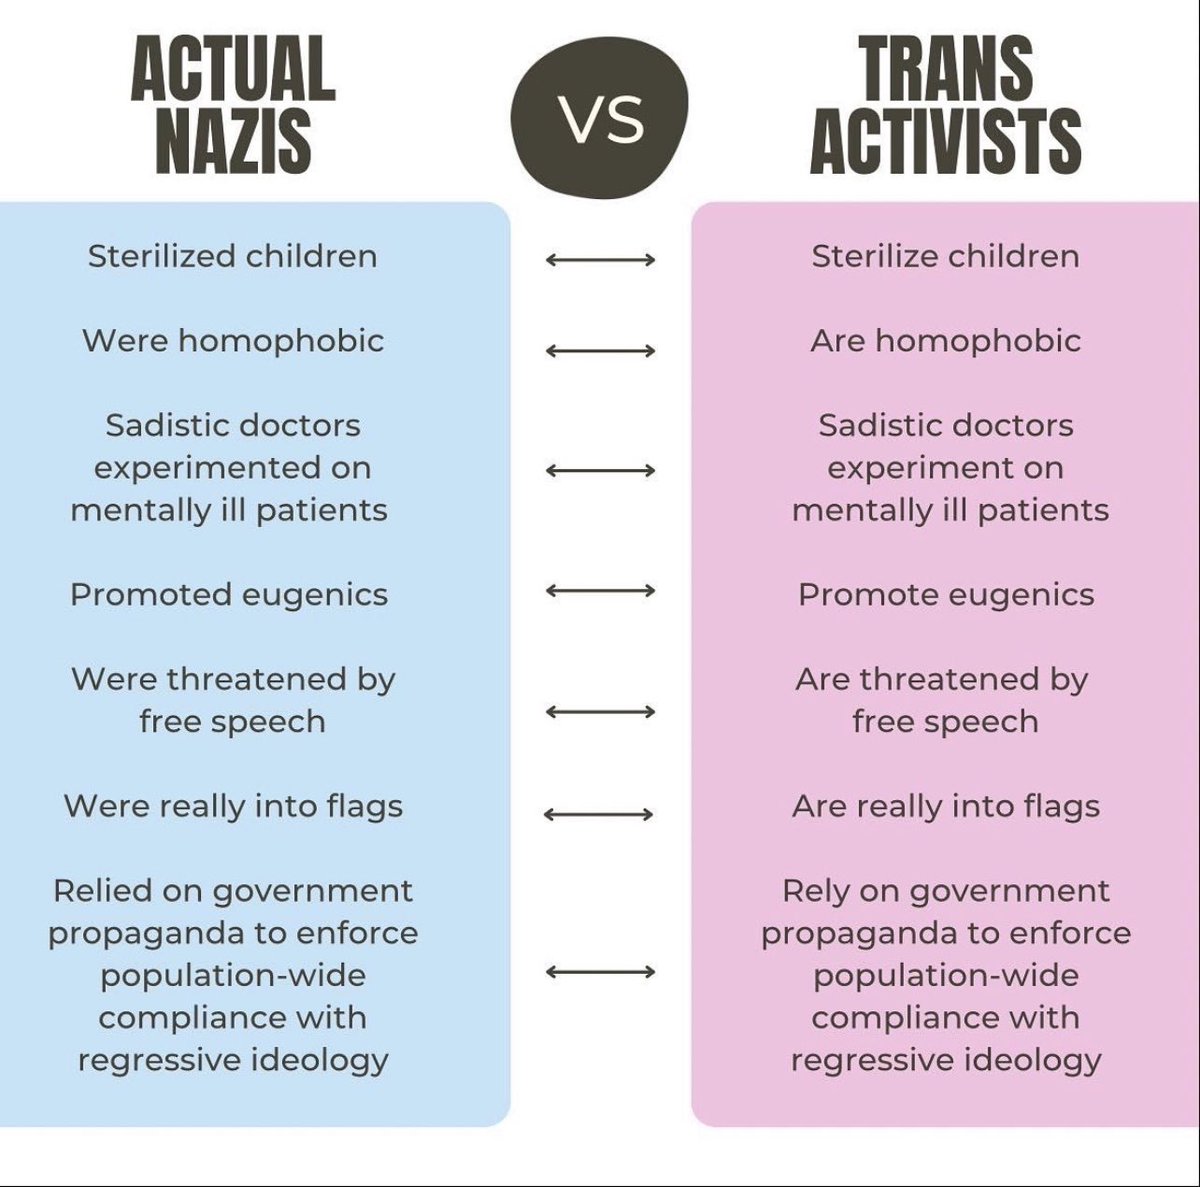 @sPeakUPdoTell I never thought the #Trans🏳️‍⚧️🤡 community would so overtly ‘out’ themselves as actual Nazis - I need to add to this list that they are on side for Holocaust 2.0! 

The writing is so clearly on the wall. #DeNazify the LGBT - #LGBwithoutTheT NOW!